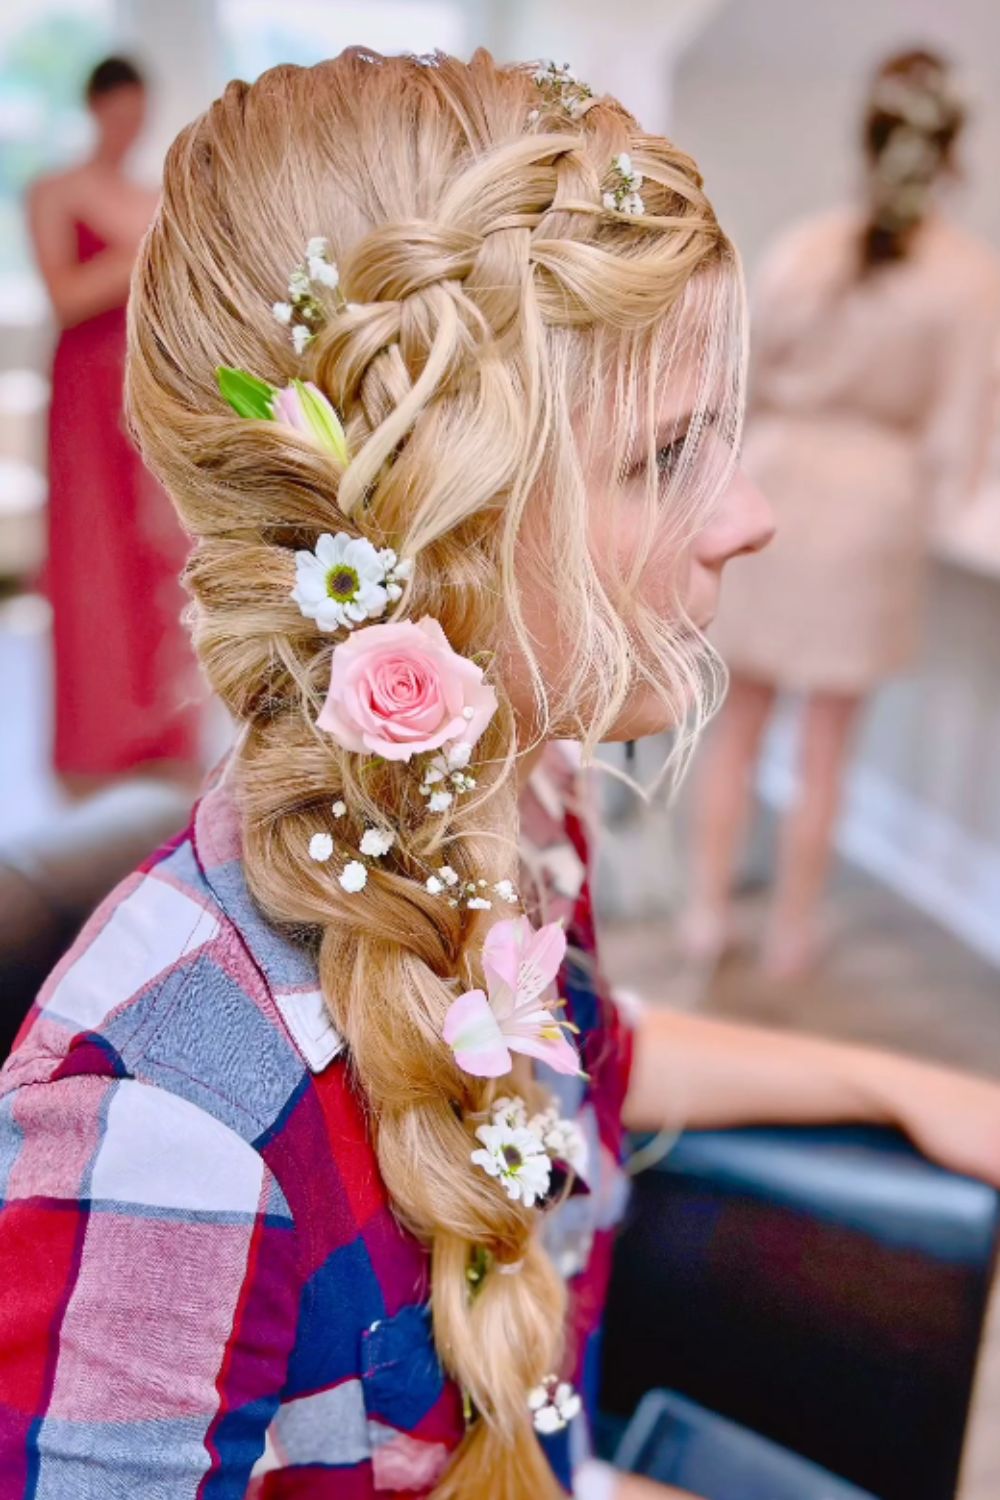 A woman with a blonde side braid with flower accessories.